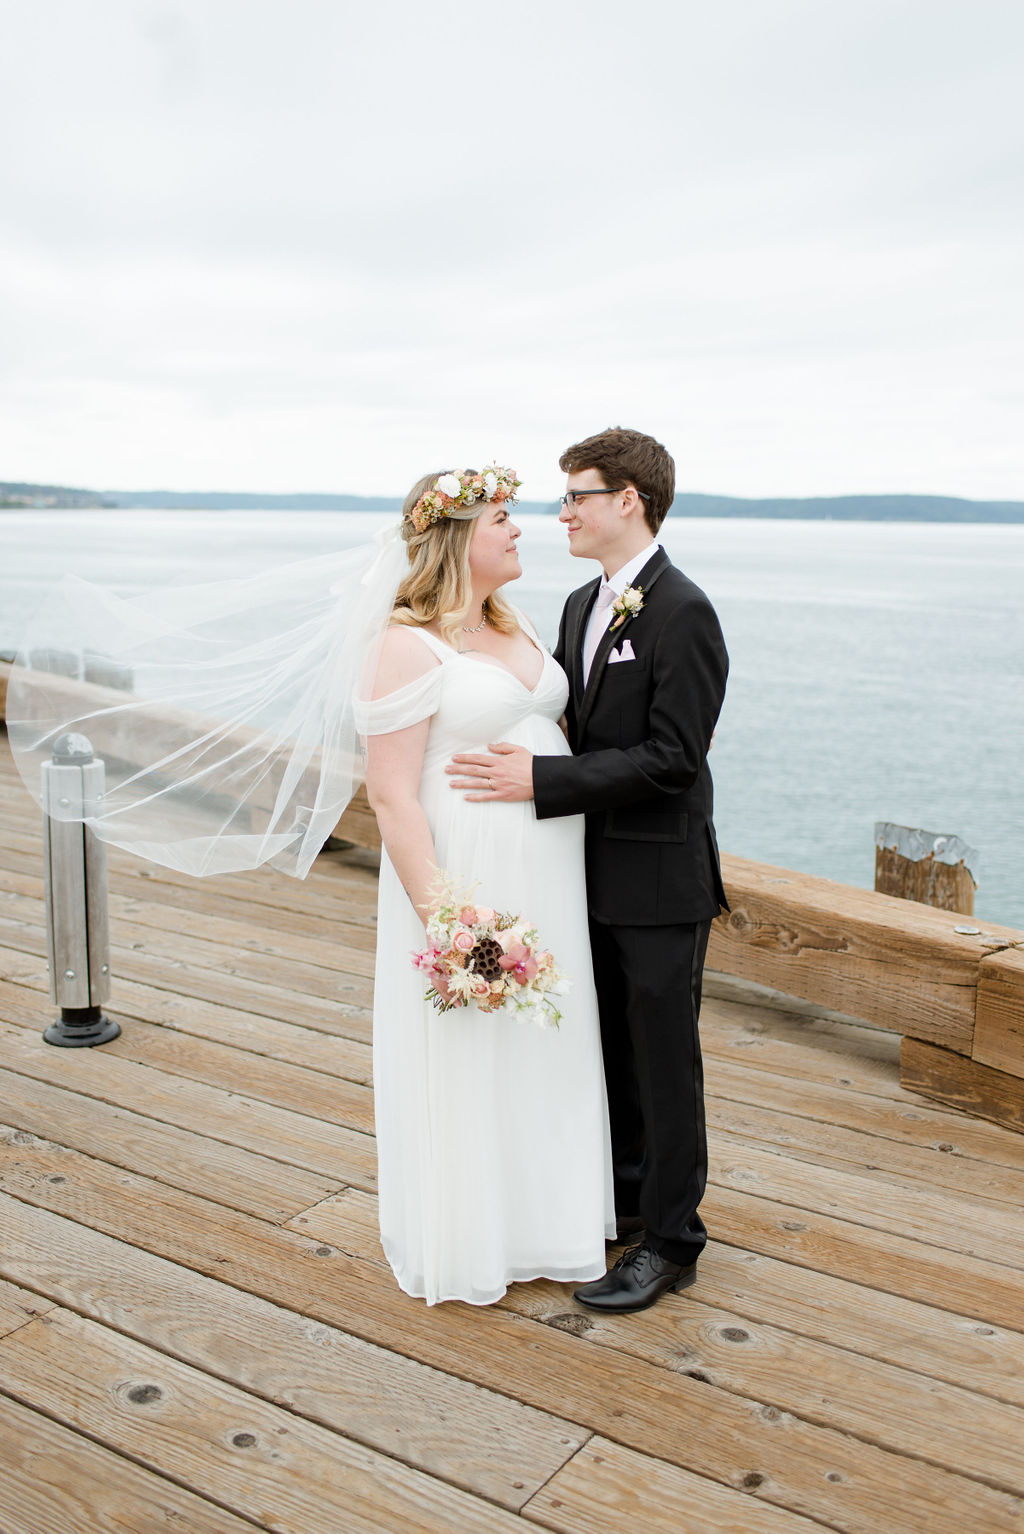 Newlyweds on Old town dock in Tacoma